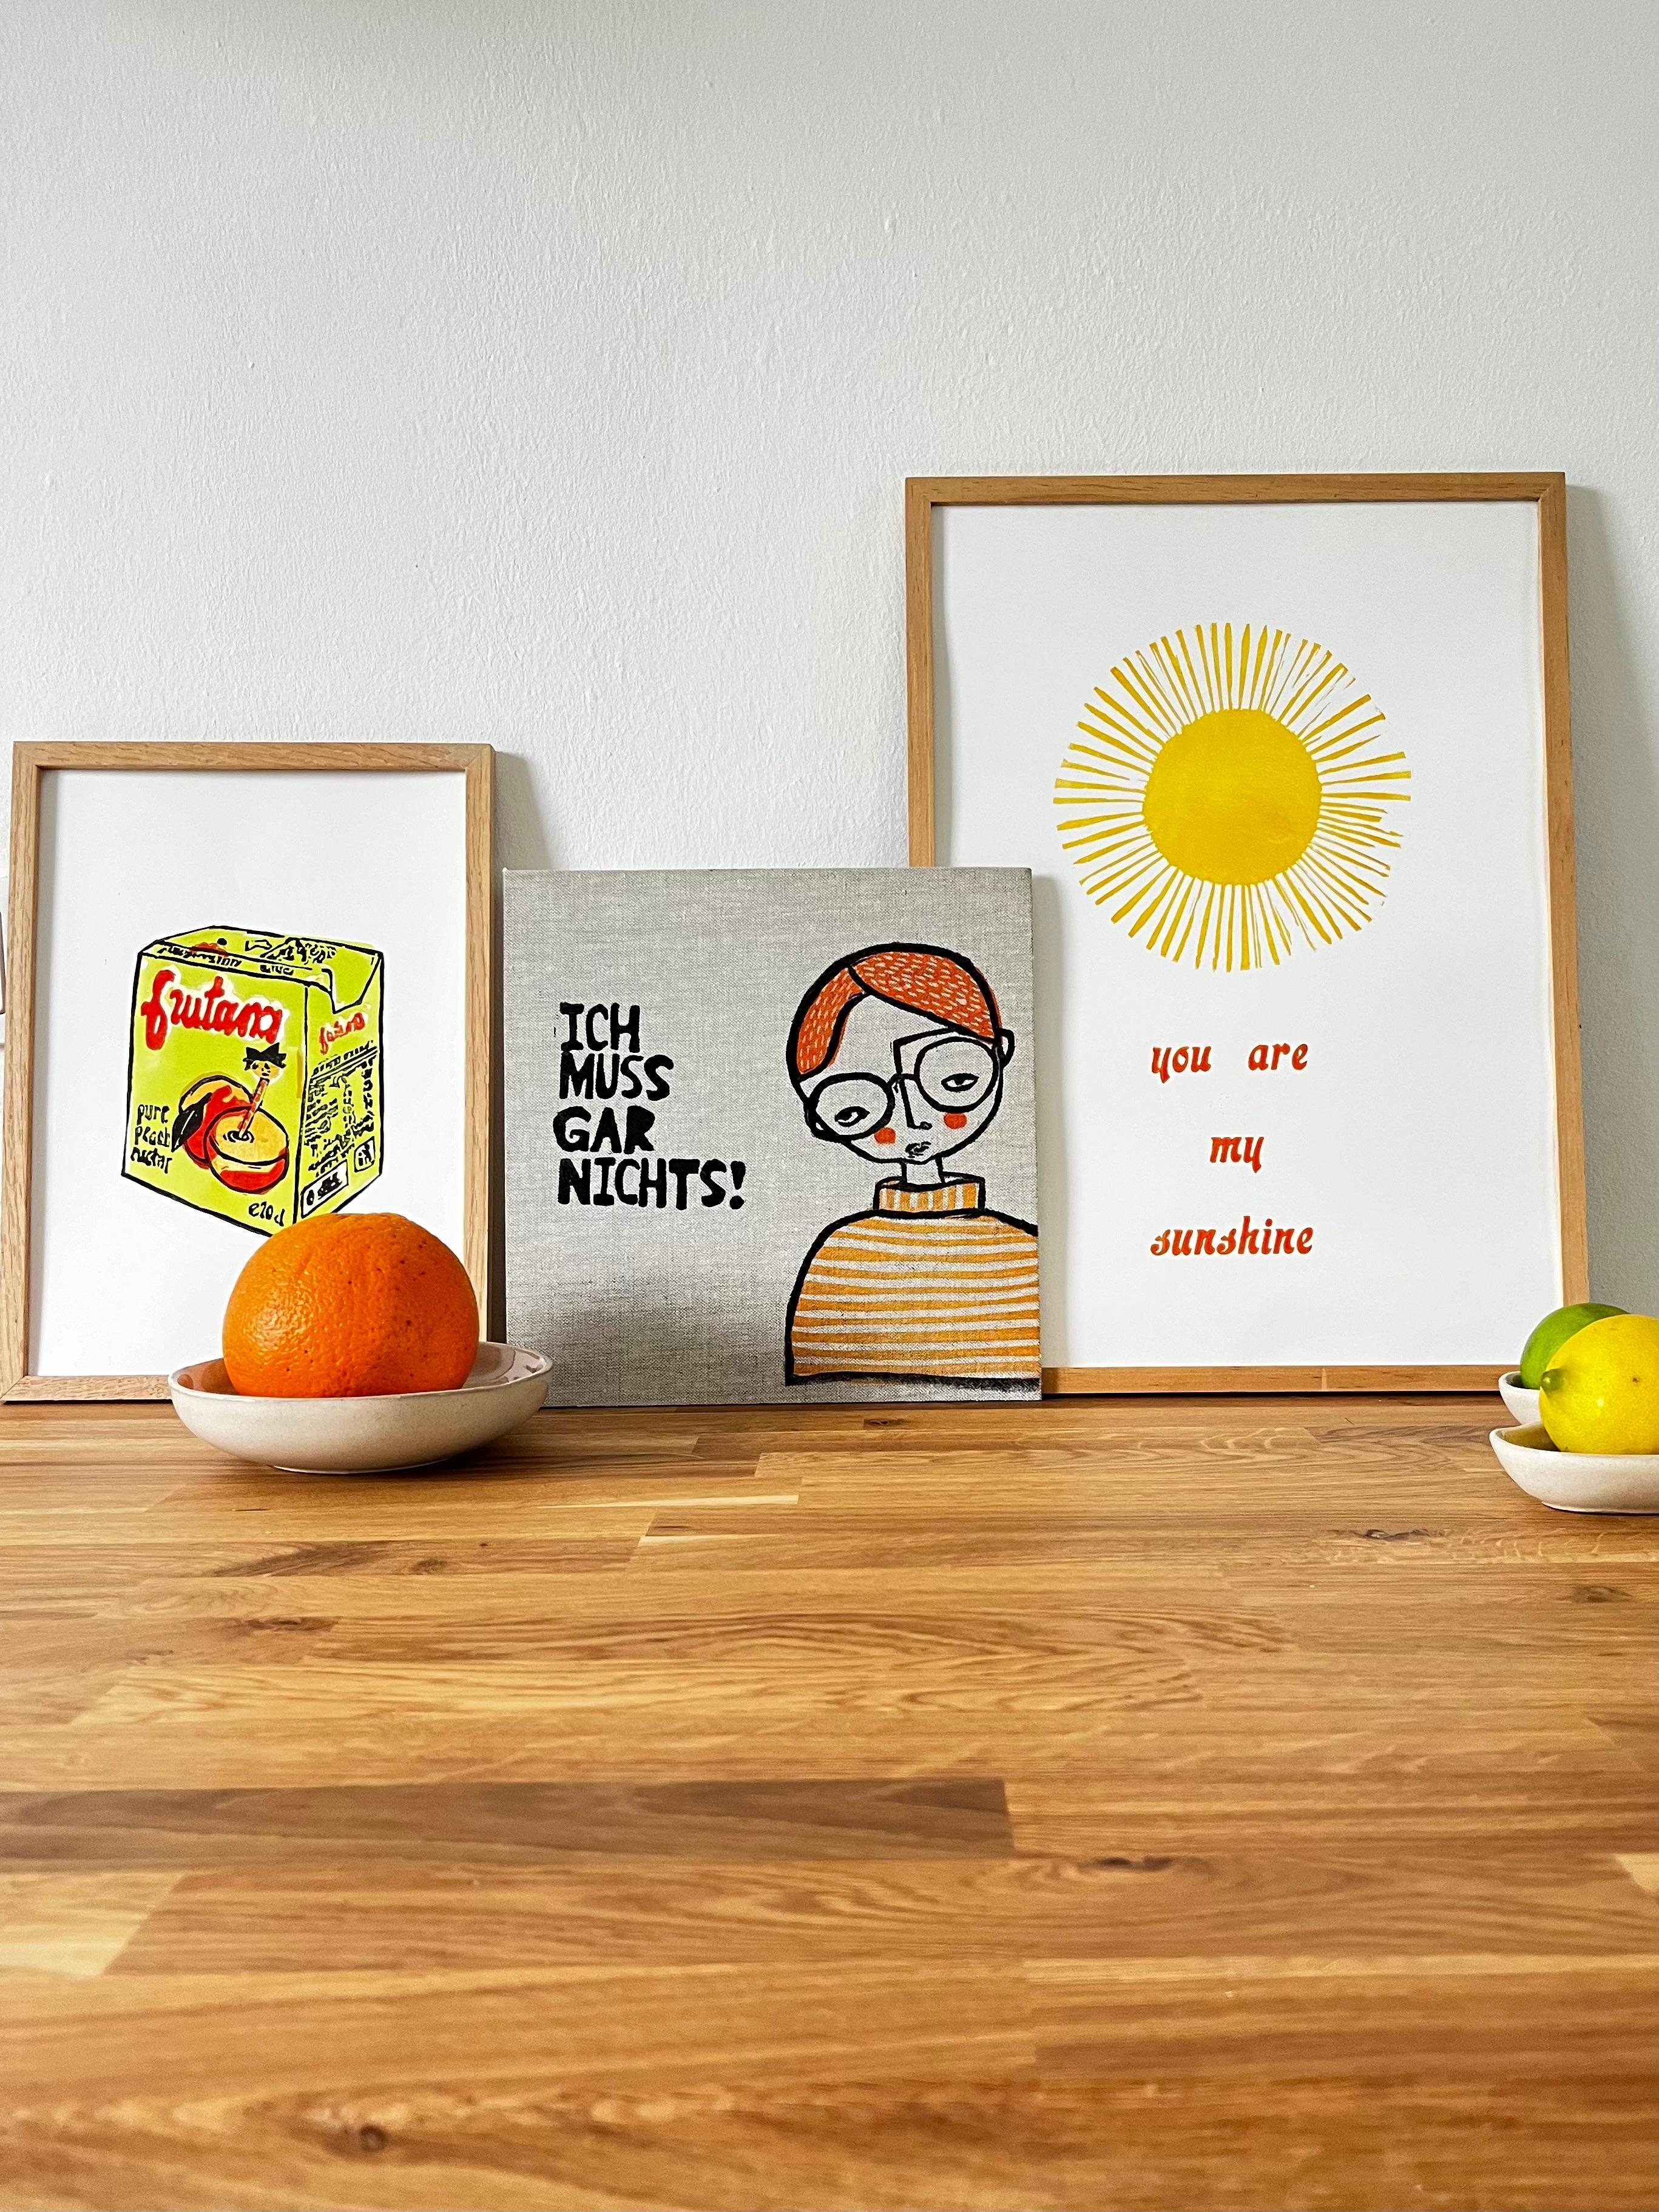 ☀️ There’s no place like home - so give it some love! ☀️

.
https://papelami.de/produkt/letterpres